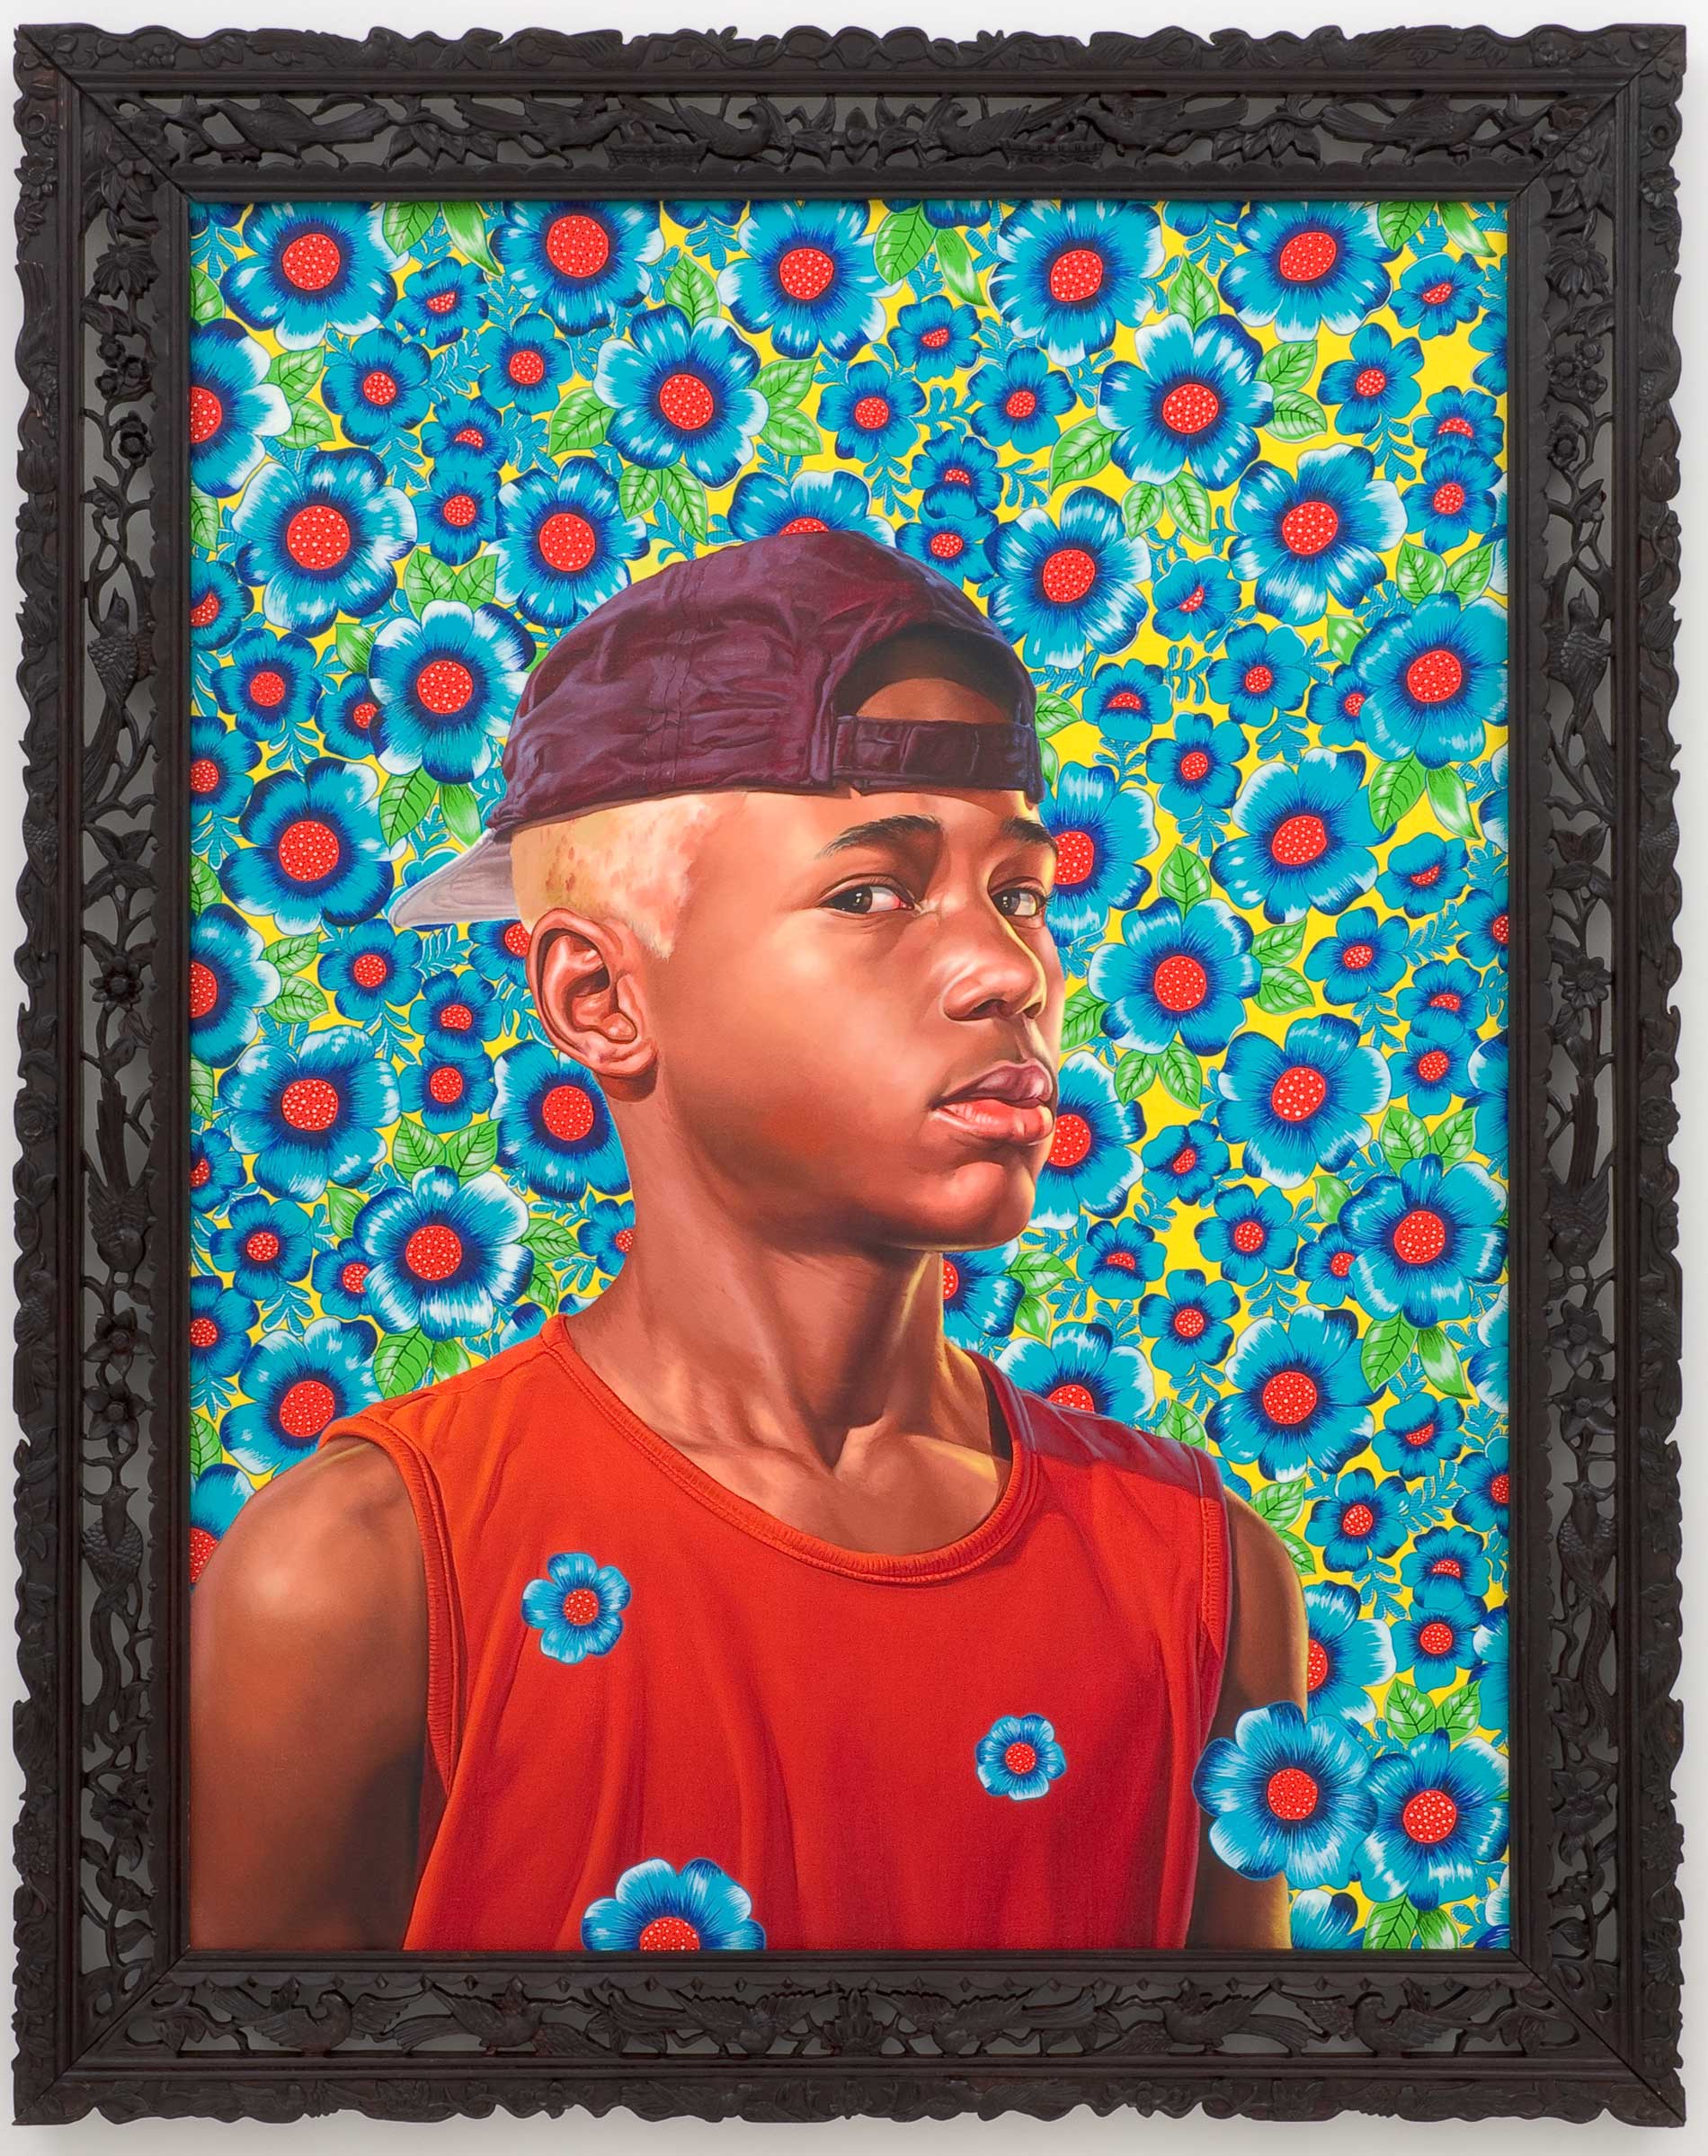 Kehinde Wiley | The World Stage: Brazil | Anderson Romualdo Cordeiro, 2008 Oil on Canvas.  | 3